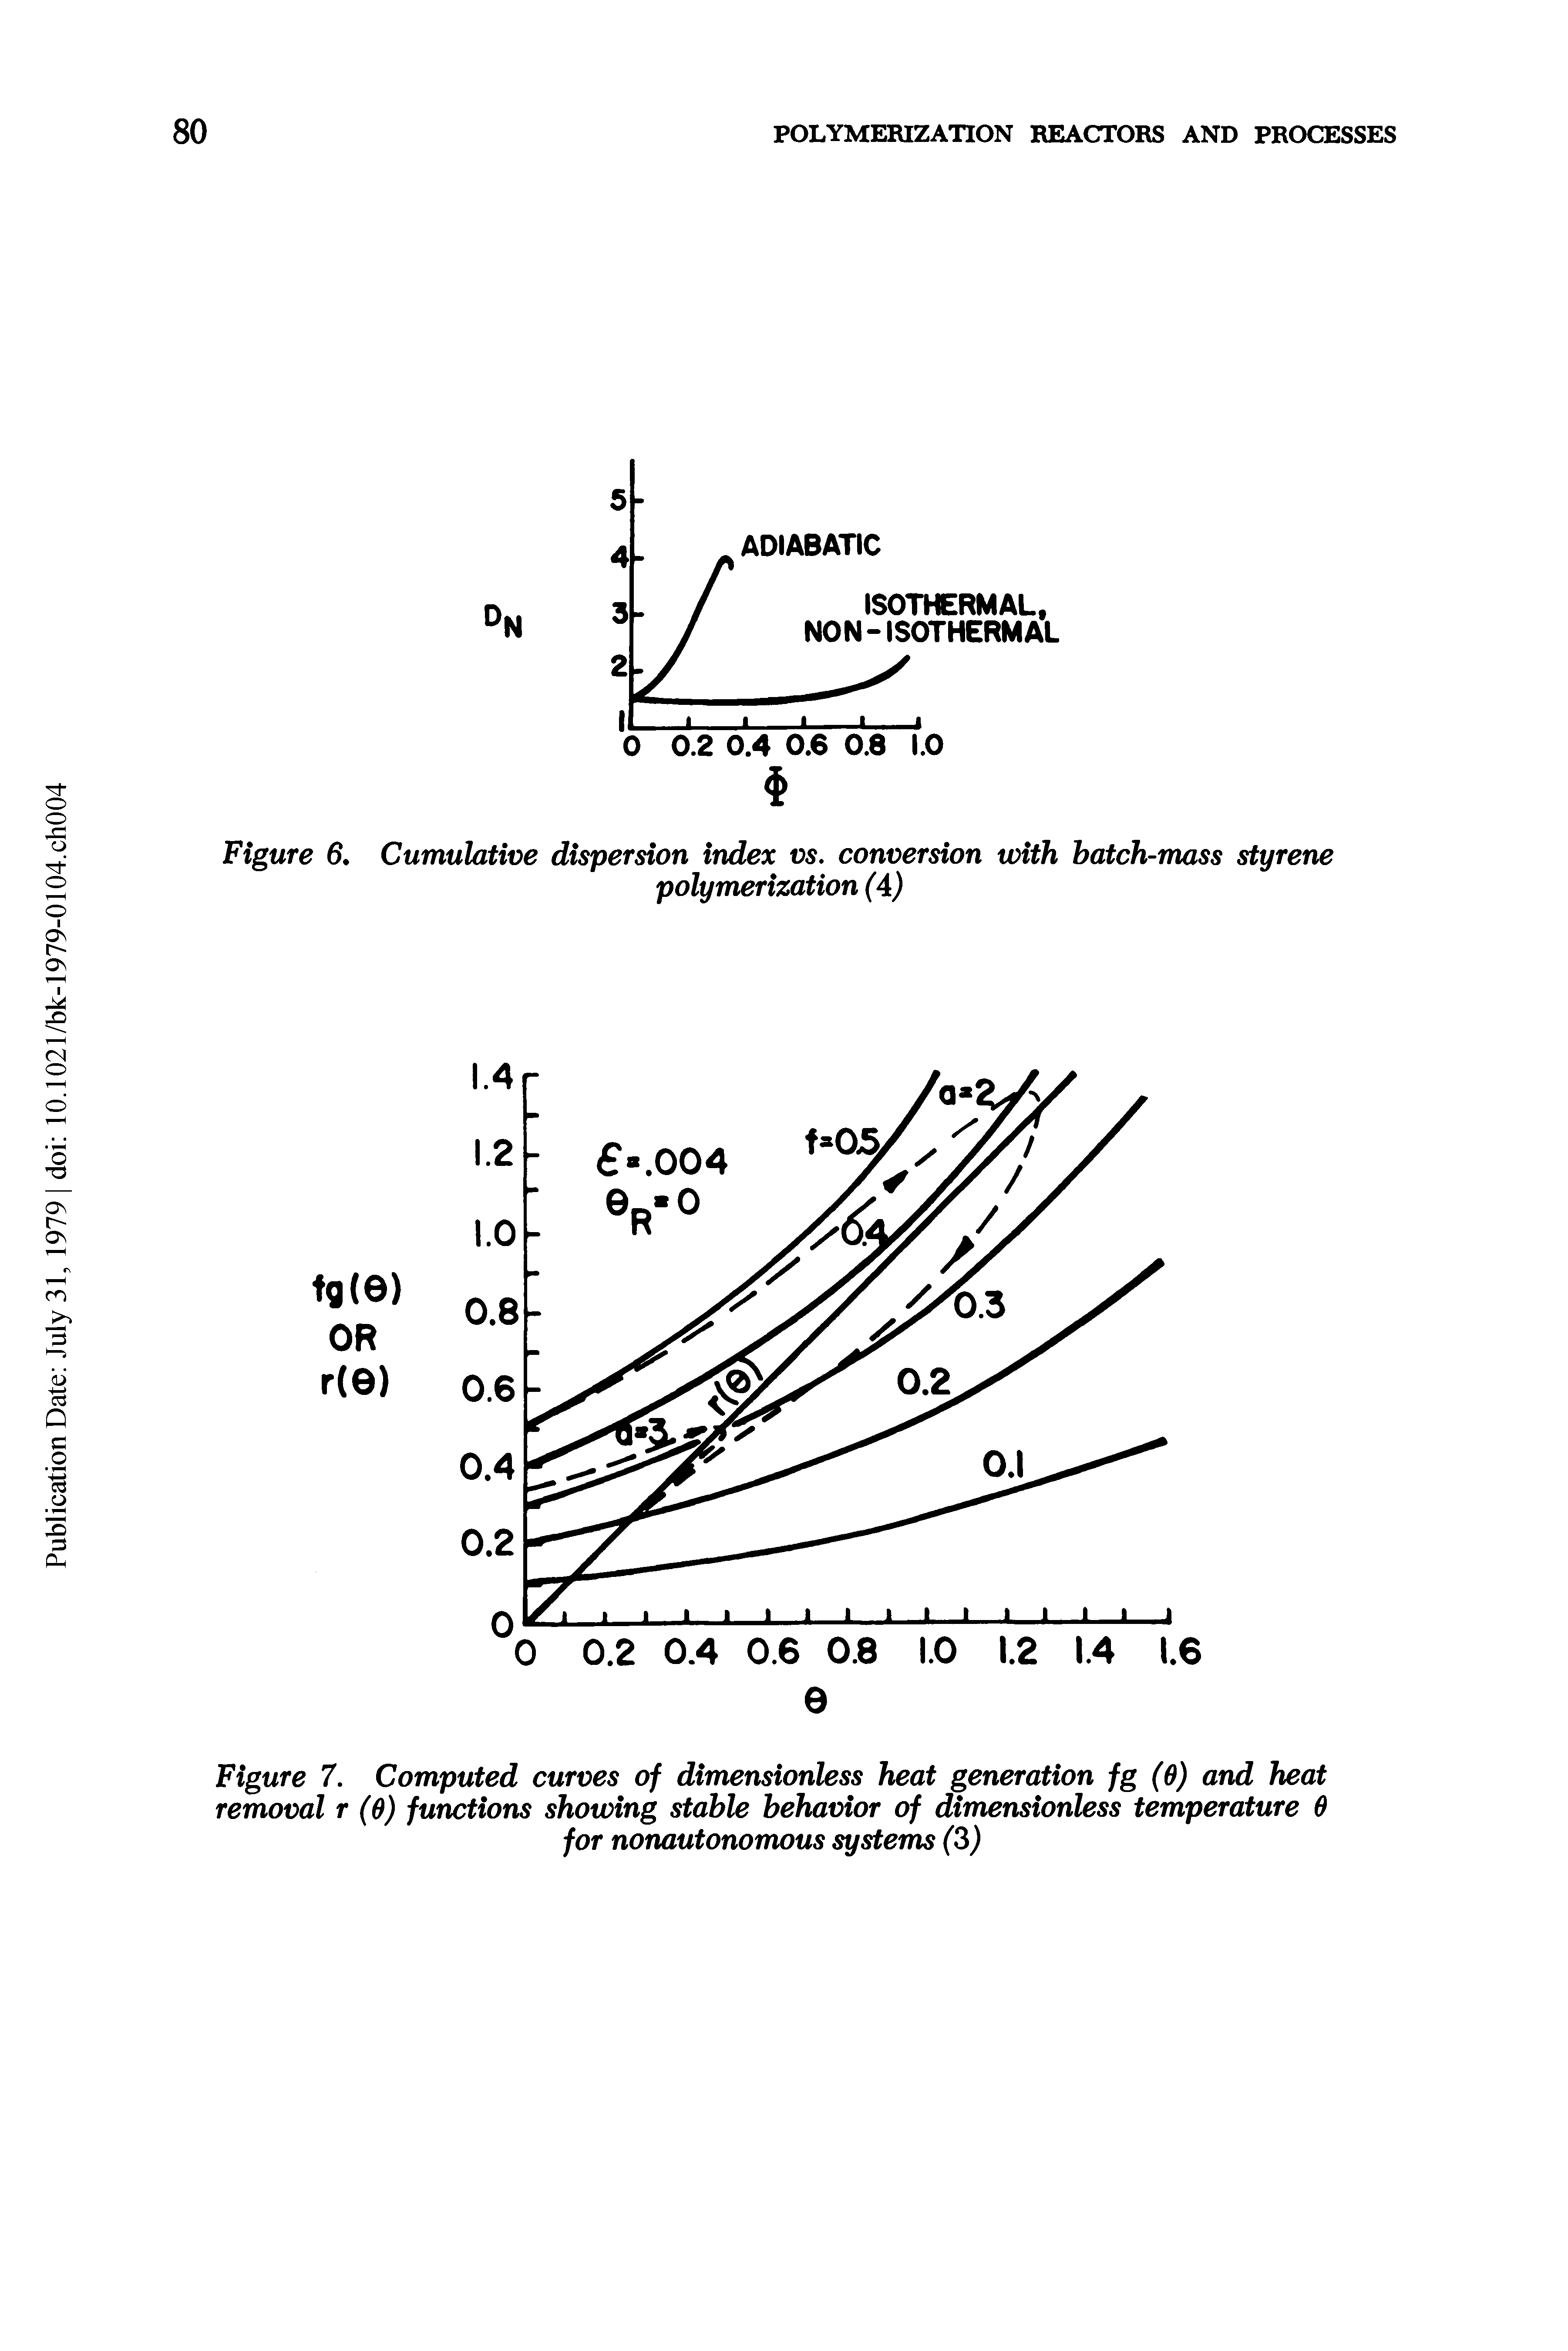 Figure 7. Computed curves of dimensionless heat generation fg (0) and heat removal r ( ) functions showing stable behavior of dimensionless temperature for nonautonomous systems (3)...